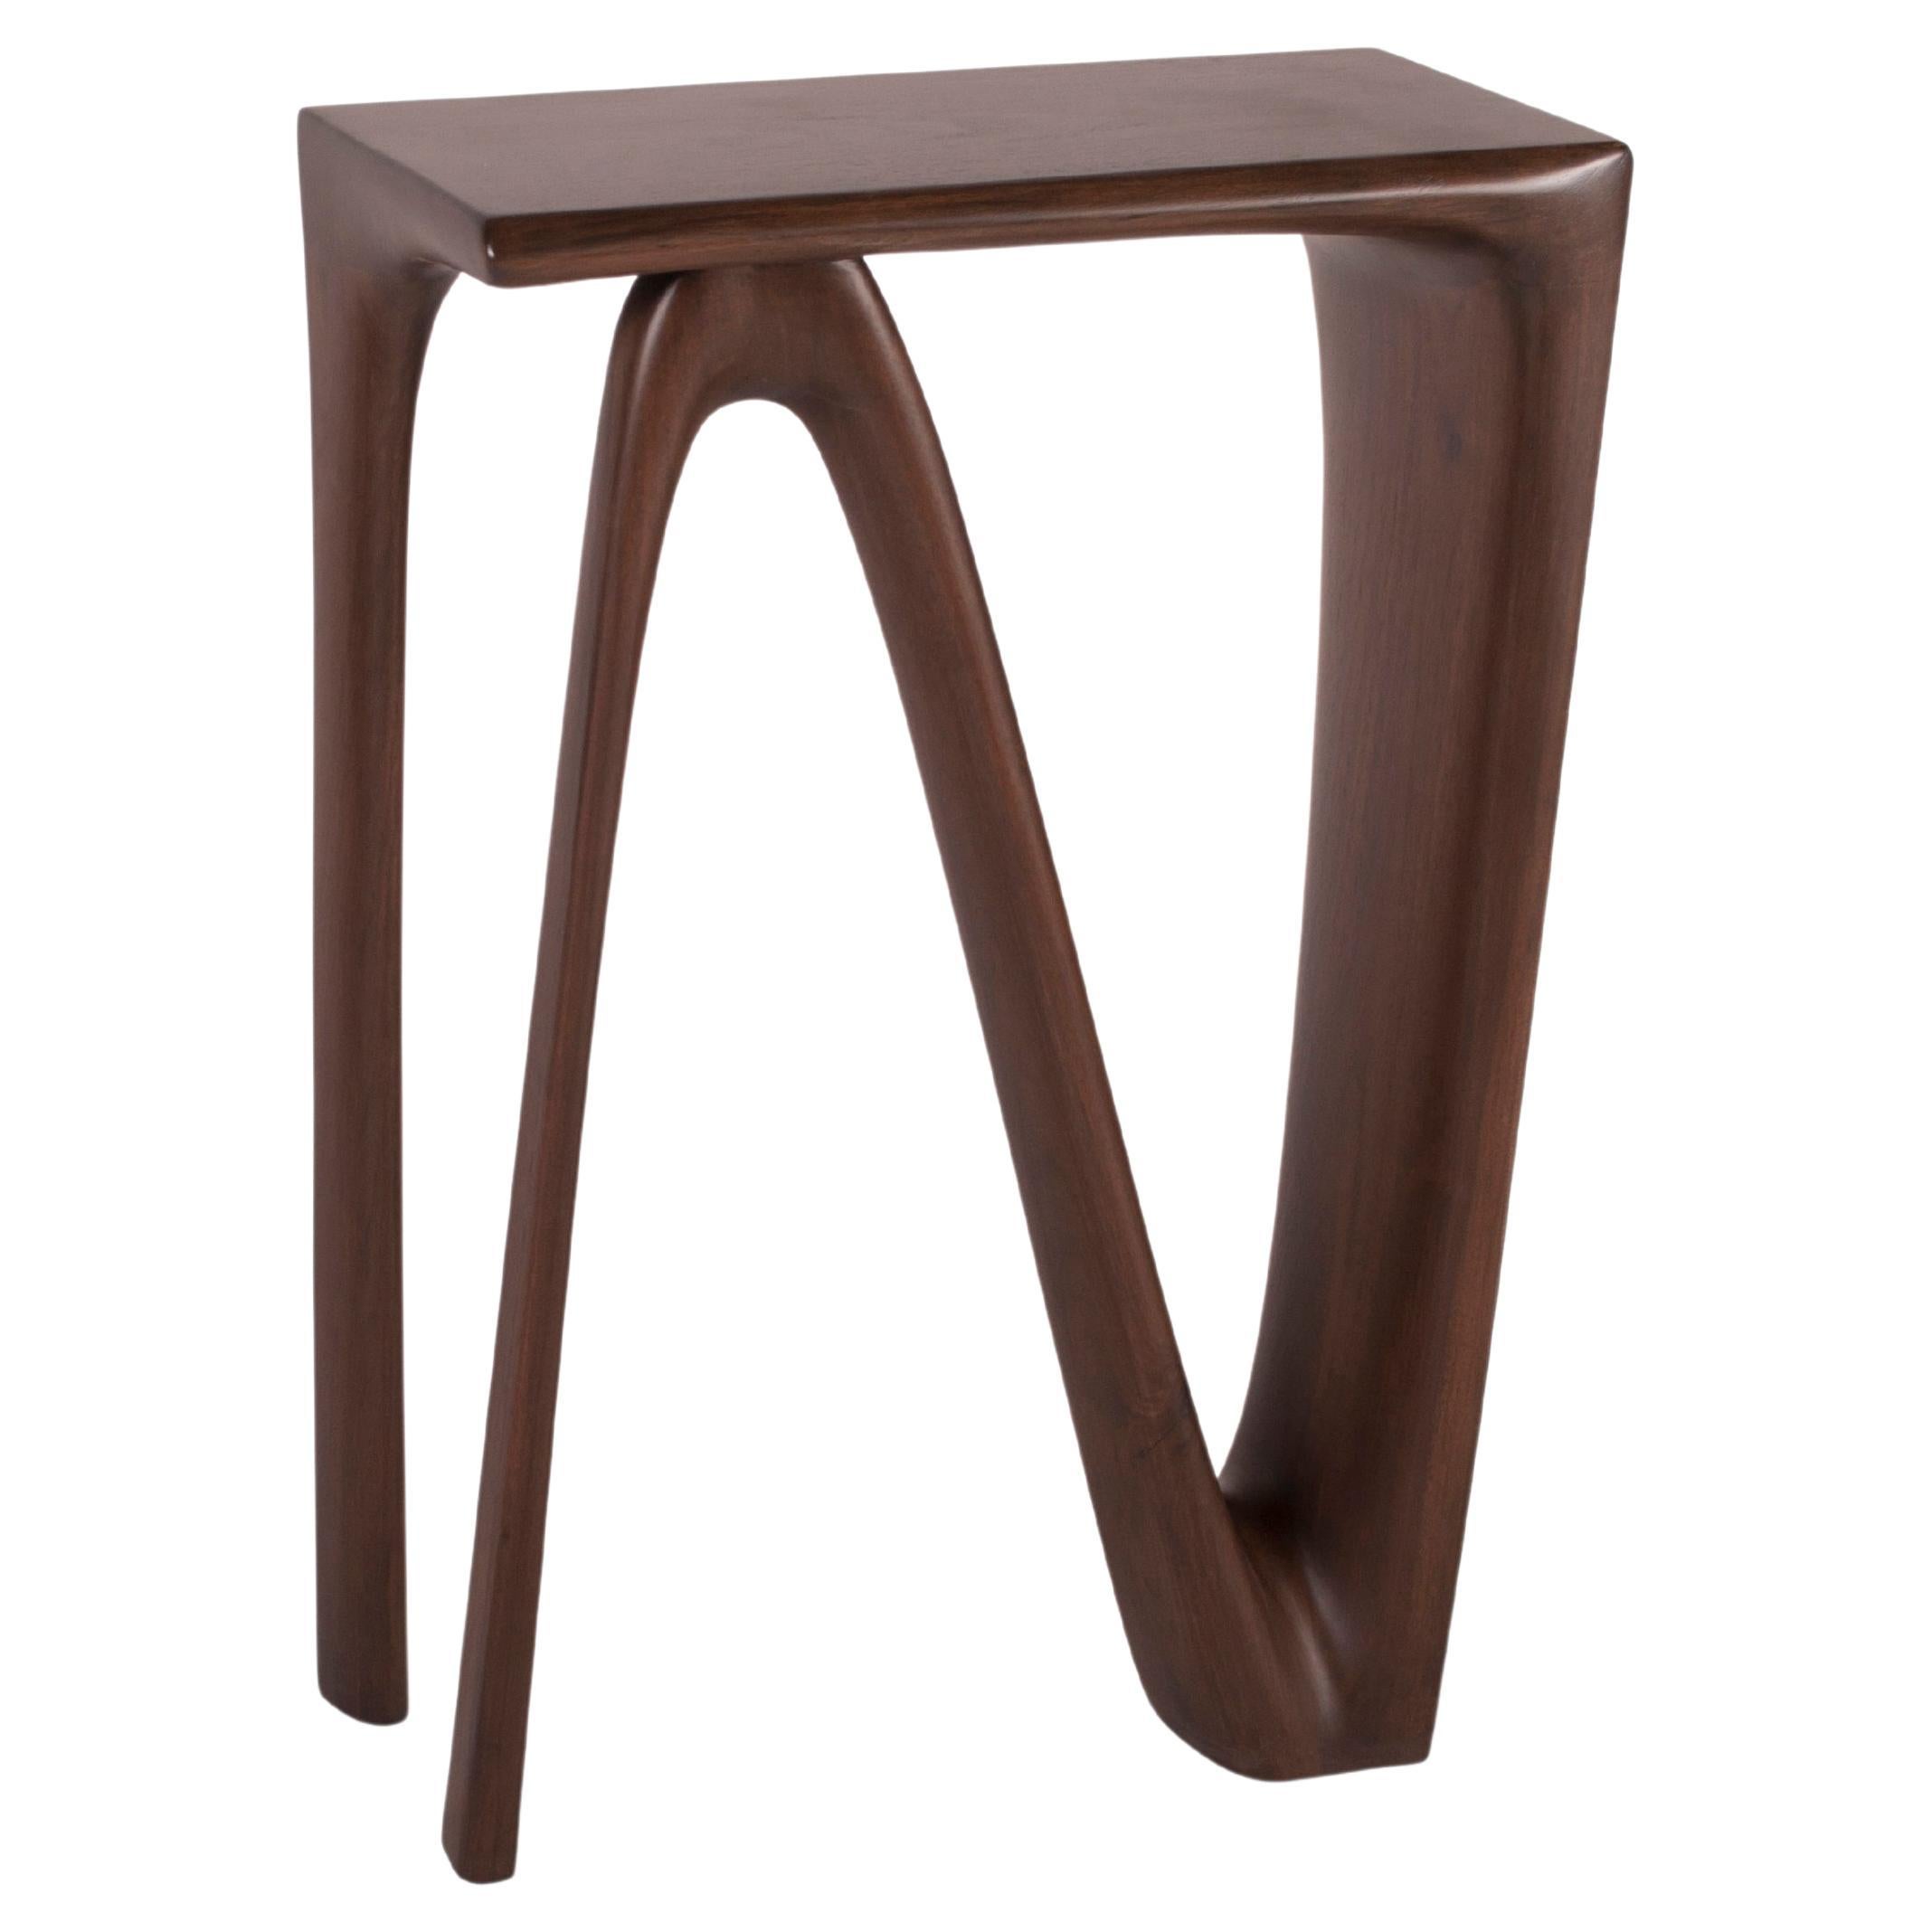 Amorph Astra Console Table Montana stain on Walnut wood For Sale